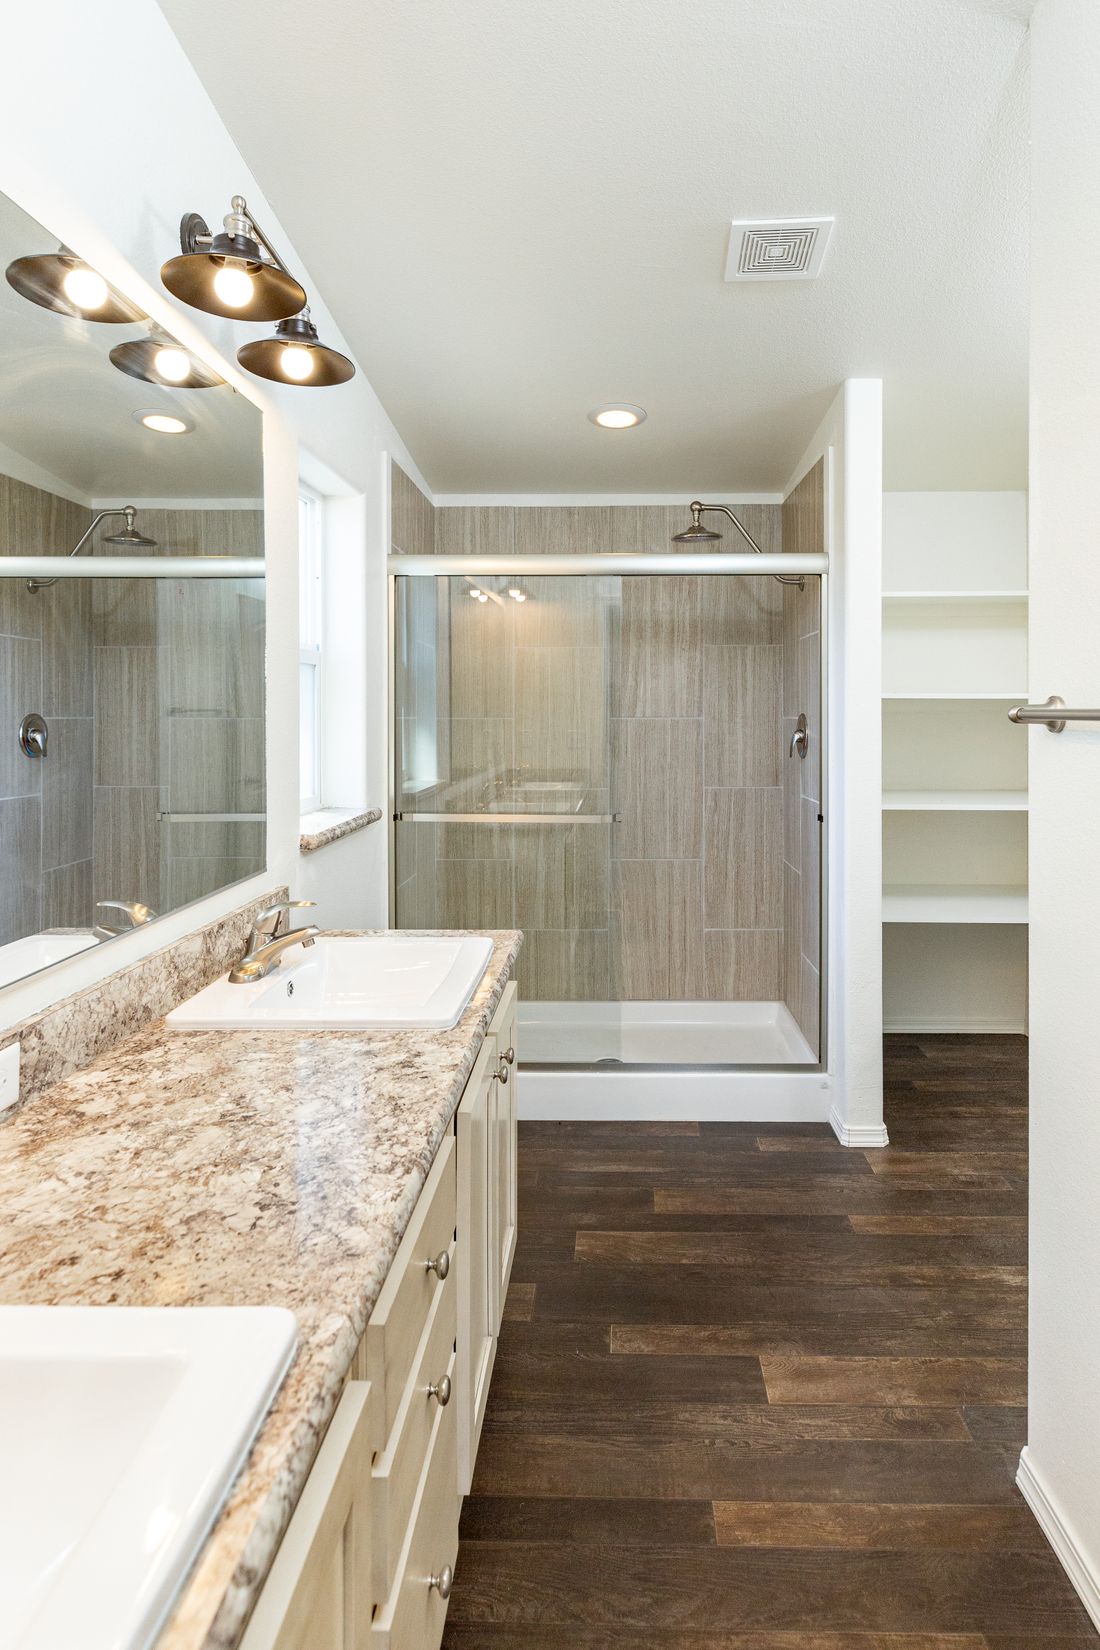 The 2017 COLUMBIA RIVER Master Bathroom. This Manufactured Mobile Home features 3 bedrooms and 2 baths.